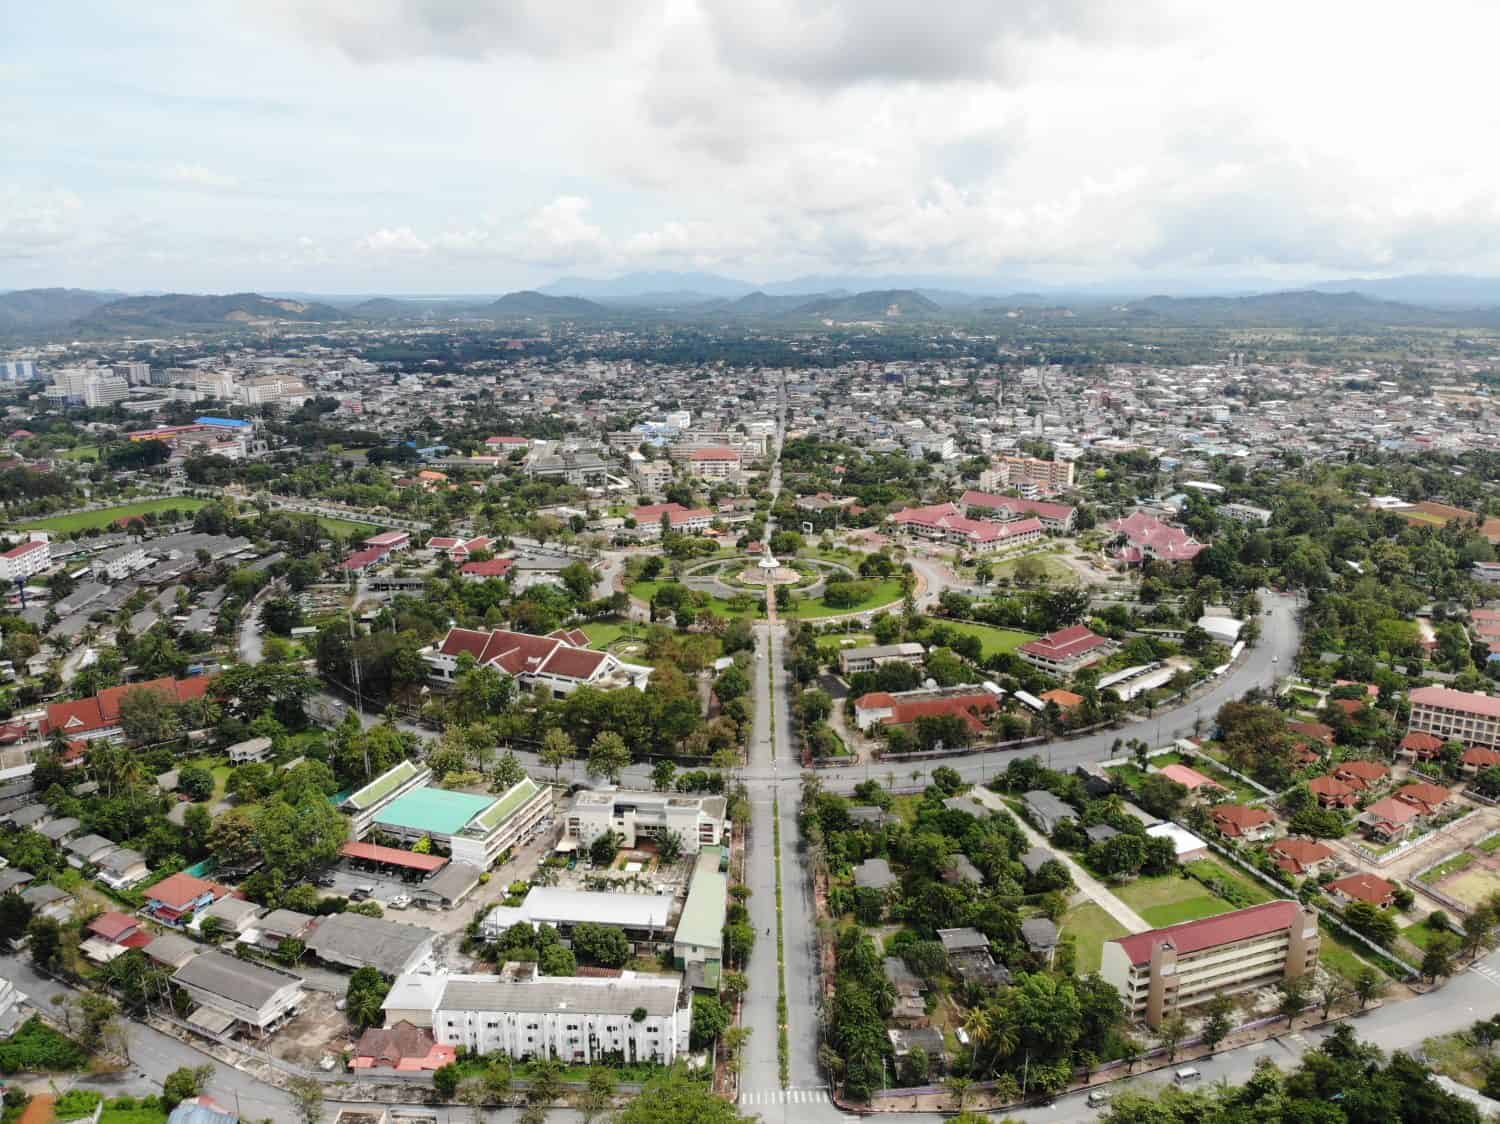 Aerial view of roundabouts, cityscape showing traffic planning, urban planning. Yala Skyline. Thailand